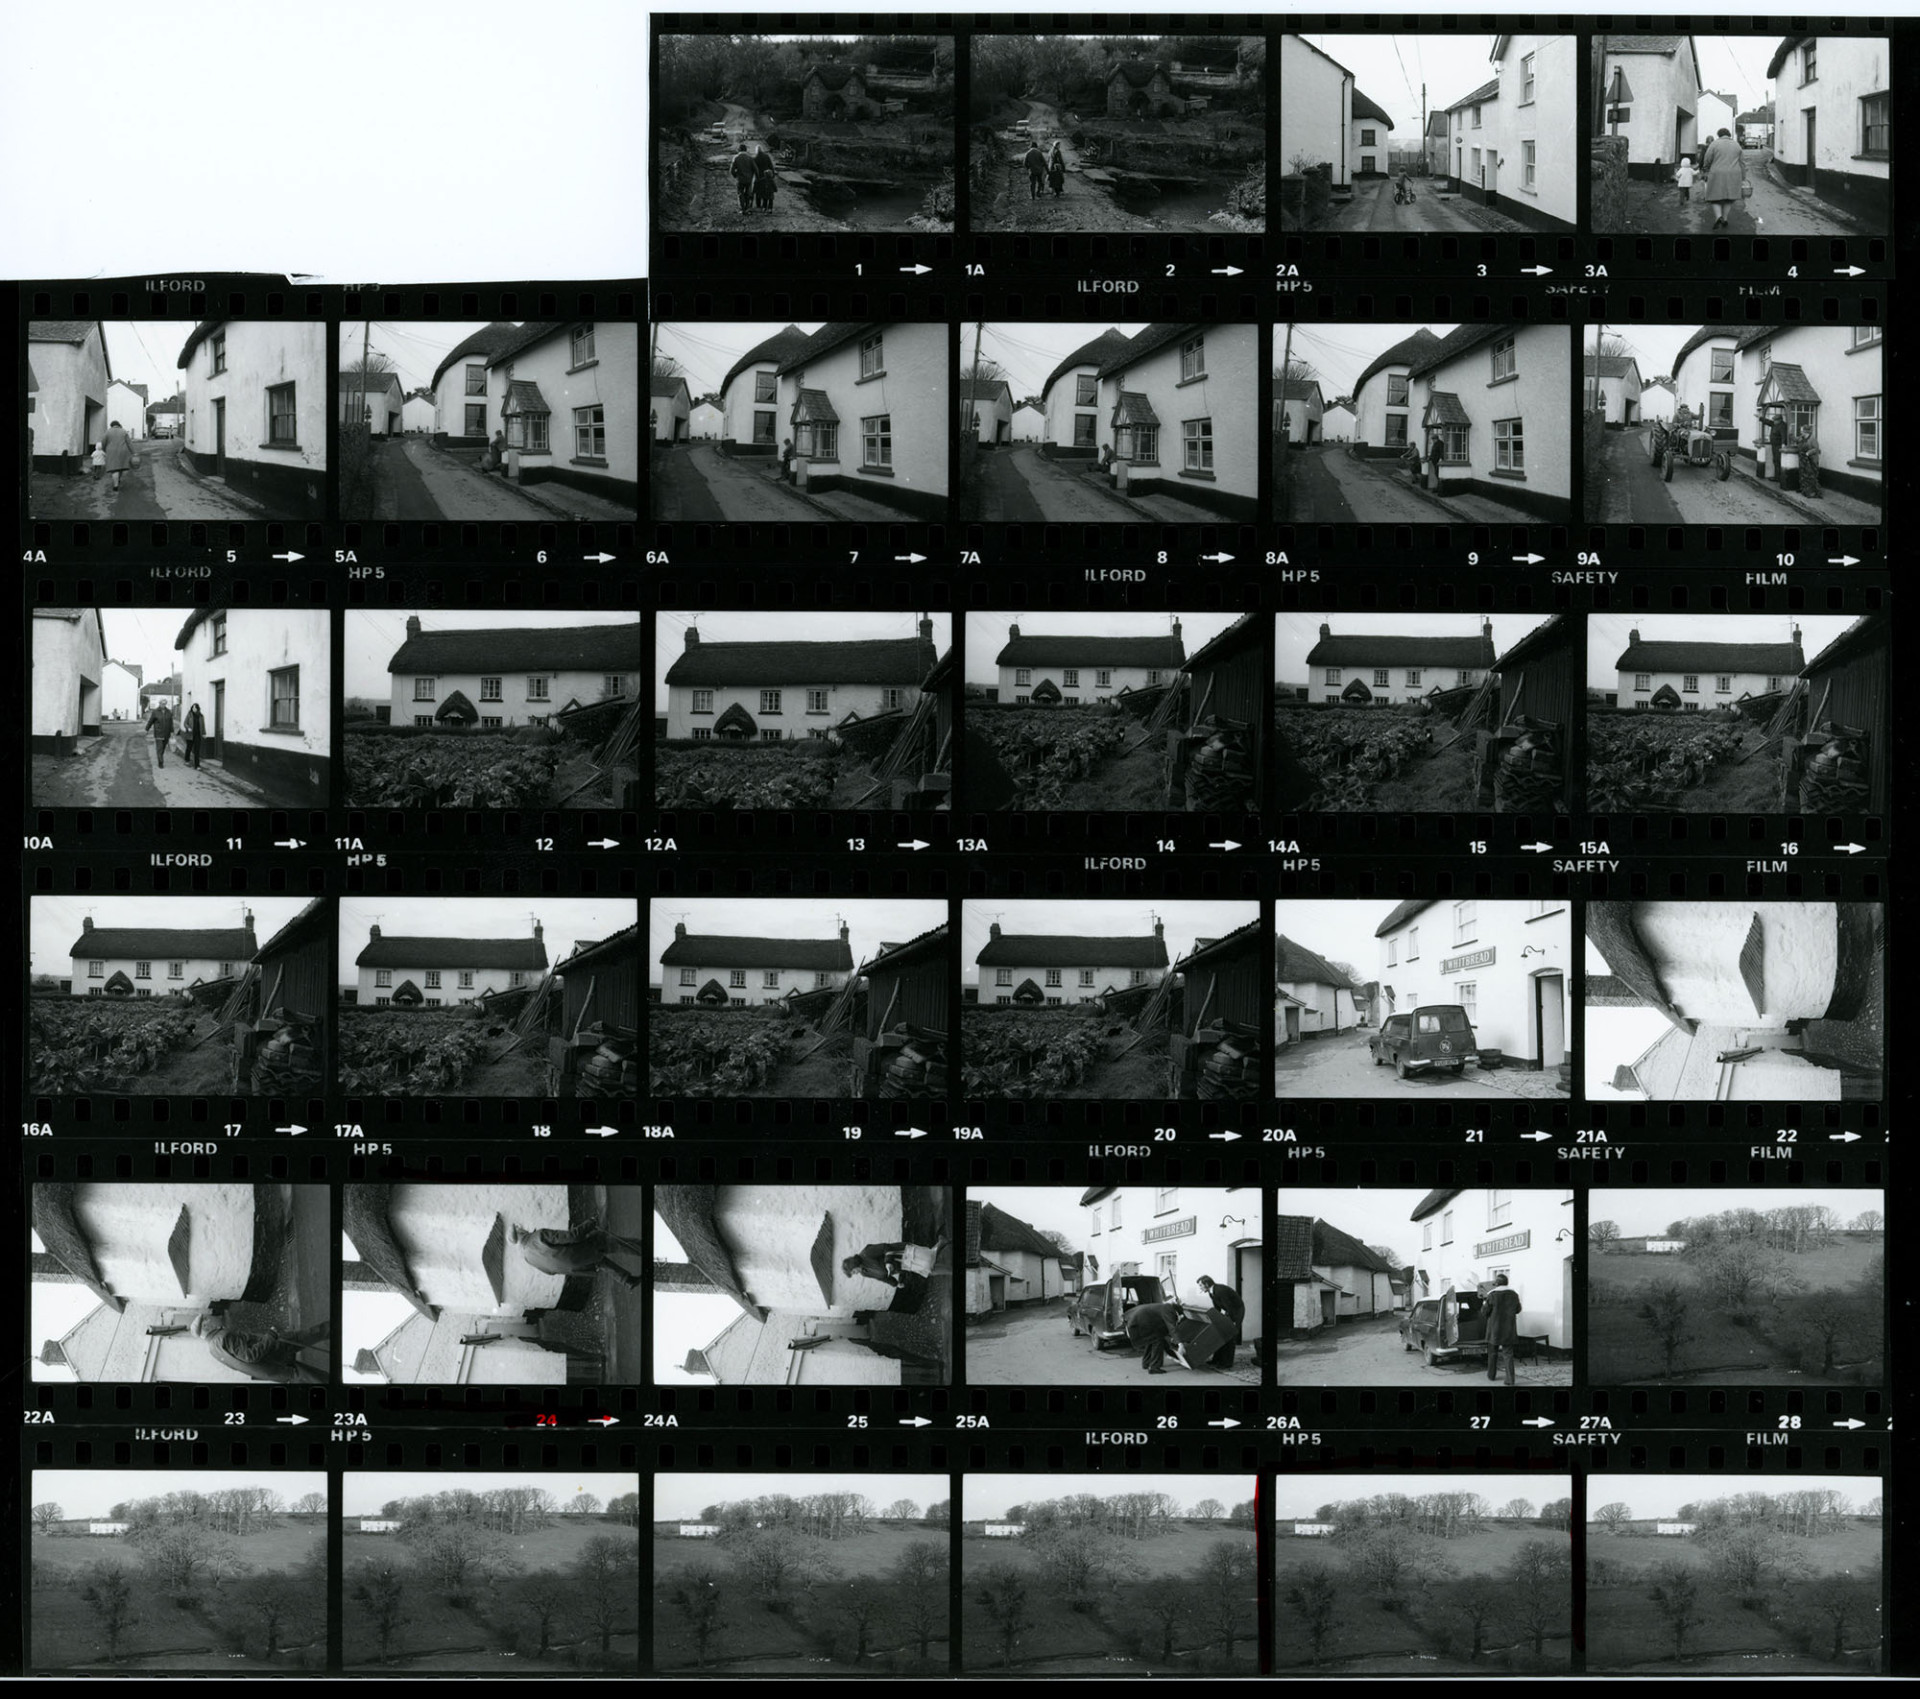 This contact sheet is in two parts. Both parts are shown on the same digital image. 
Part 1: Negative numbers 1-34.
Part 2: Negative numbers 36-41.